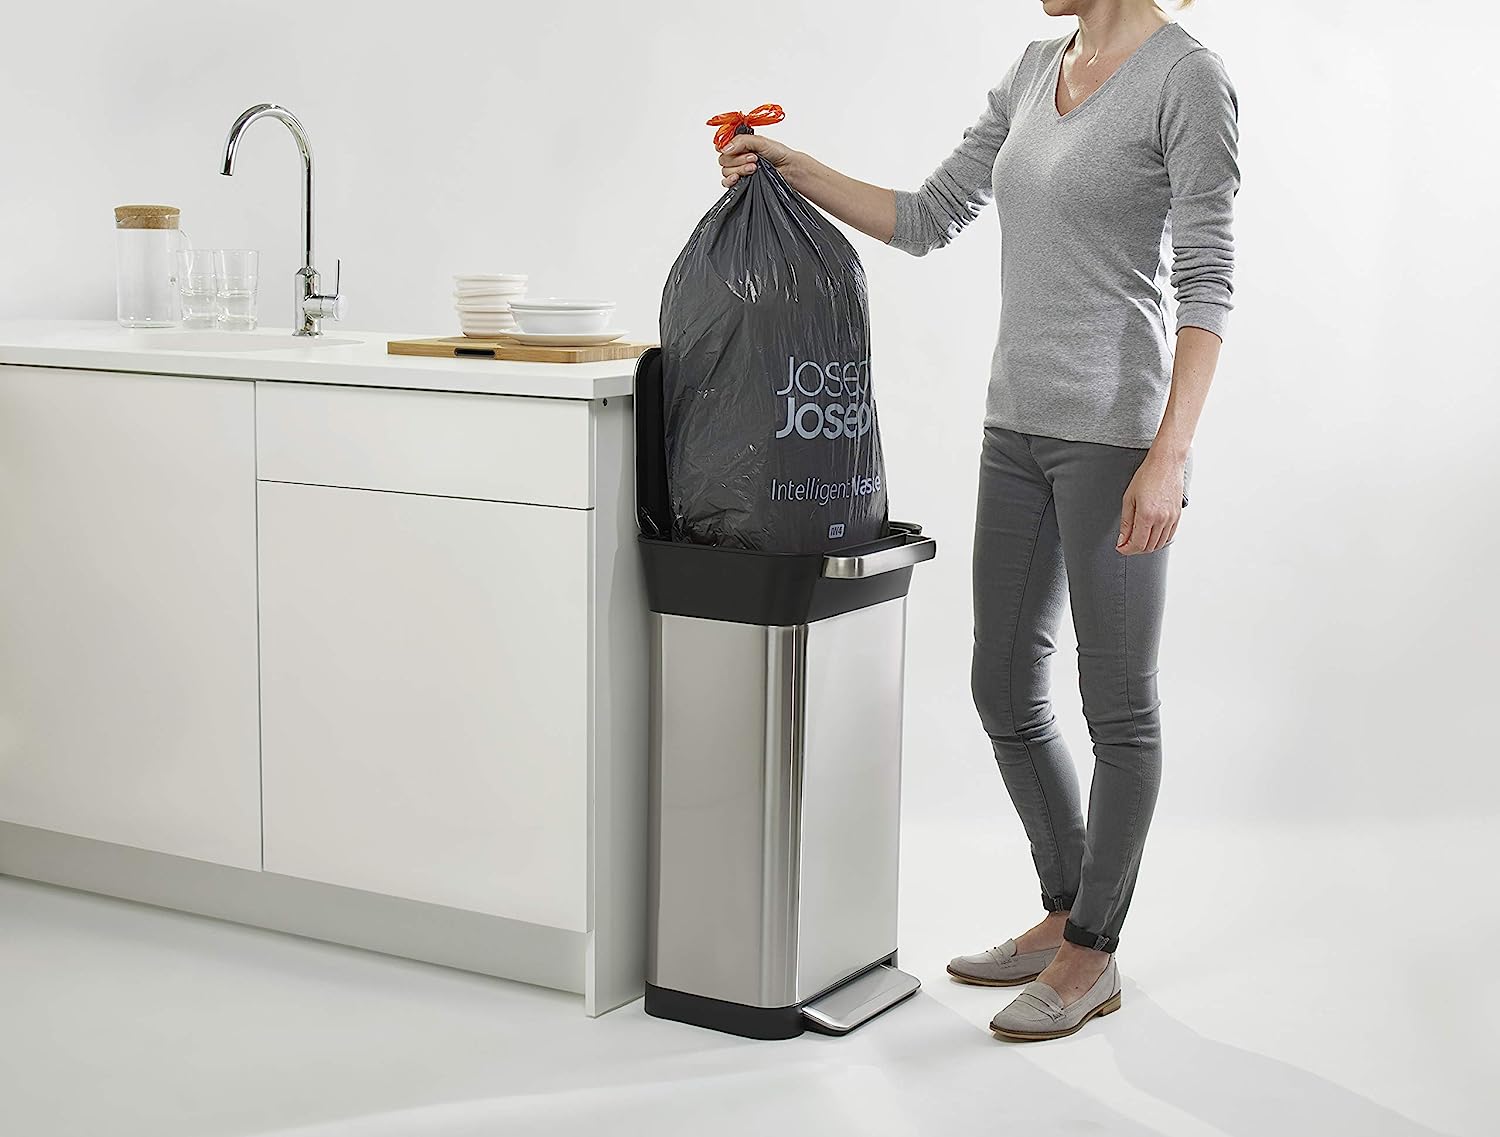 https://bigbigmart.com/wp-content/uploads/2023/11/Joseph-Joseph-Intelligent-Waste-Titan-Trash-Can-Compactor-with-Odor-Filter-Holds-Up-to-90L-After-Compaction-Stainless-Steel-30L14.jpg